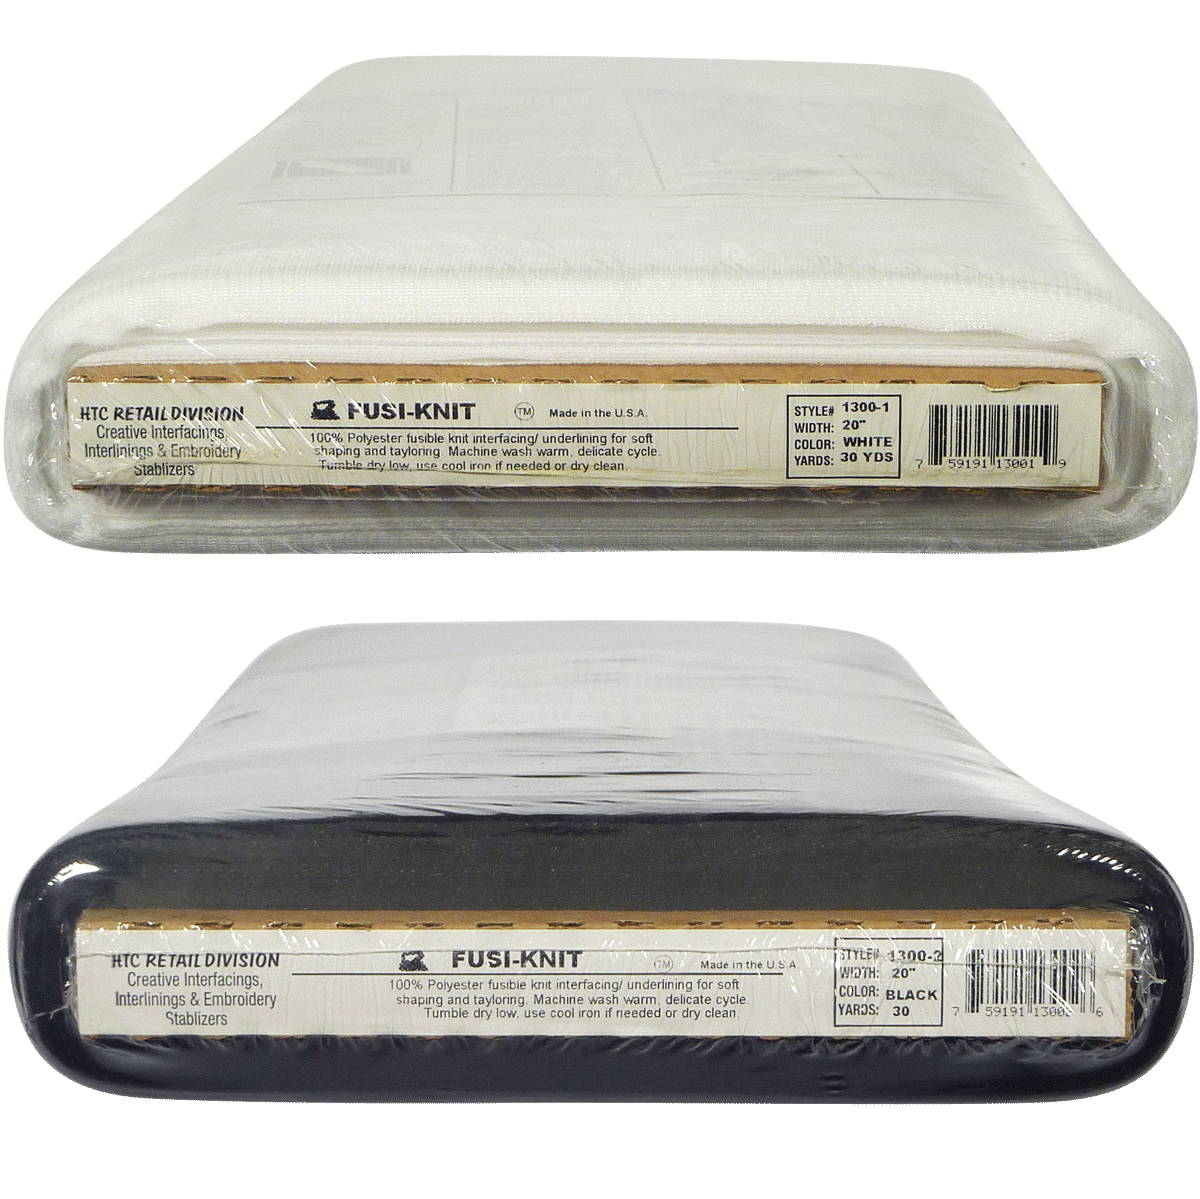 HTC So-Sheer Fusible Knit Interfacing White 1350-7 20 wide